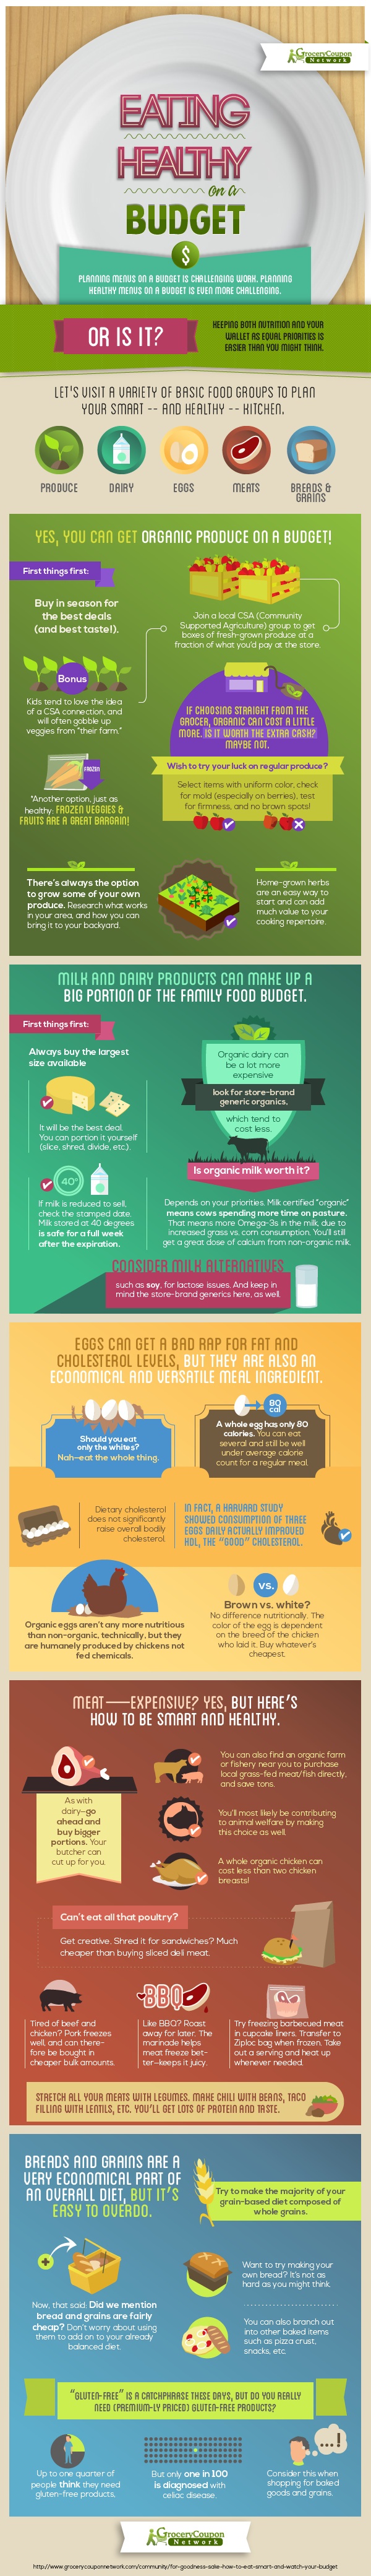 How to Eat Smart on a Budget Infographic